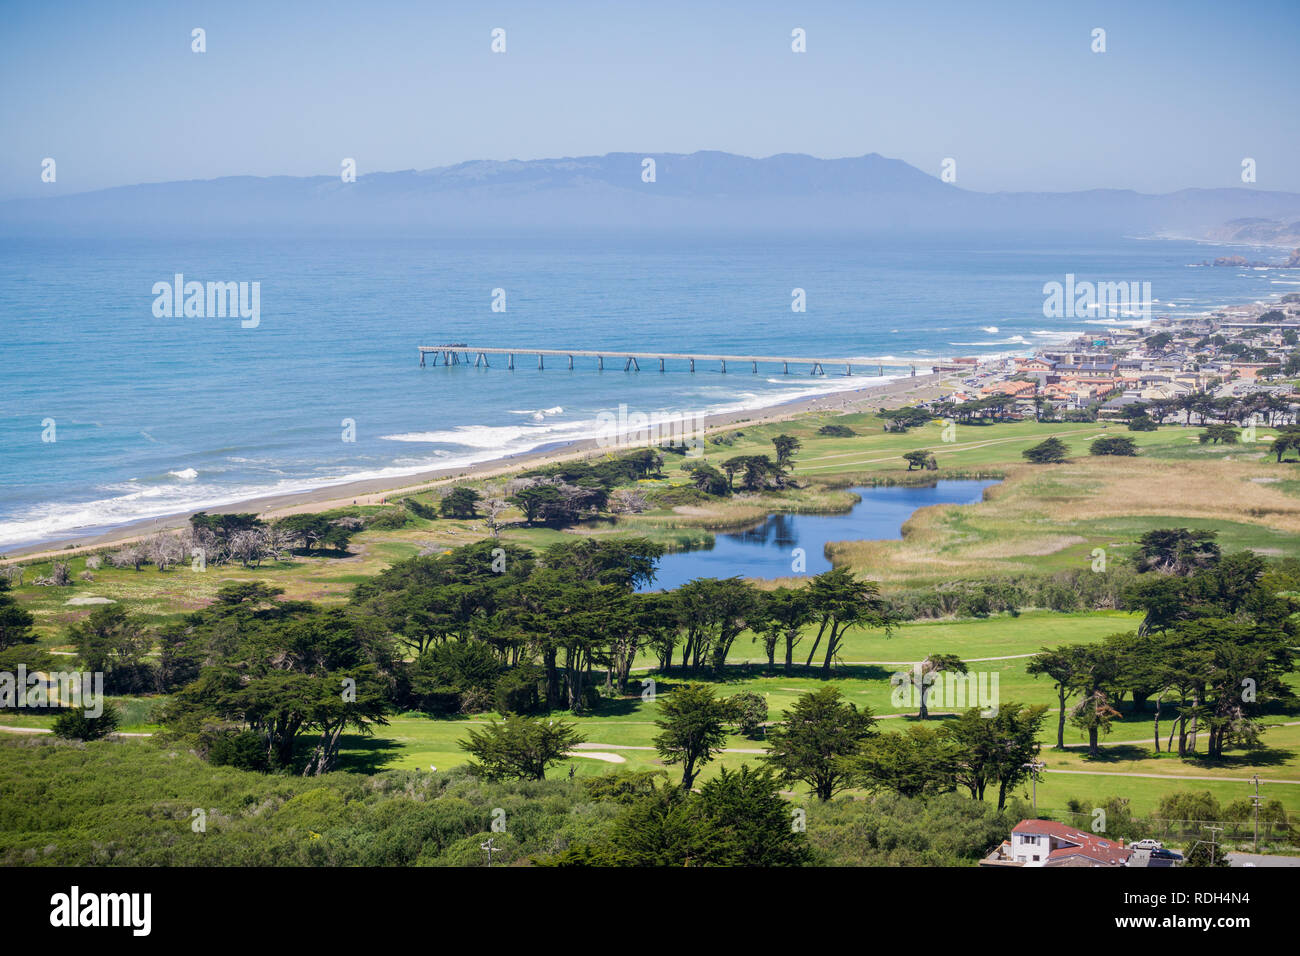 Aerial view of Pacifica Municipal Pier and Sharp Park golf course as seen  from the top of Mori Point, Marin County in the background, California  Stock Photo - Alamy